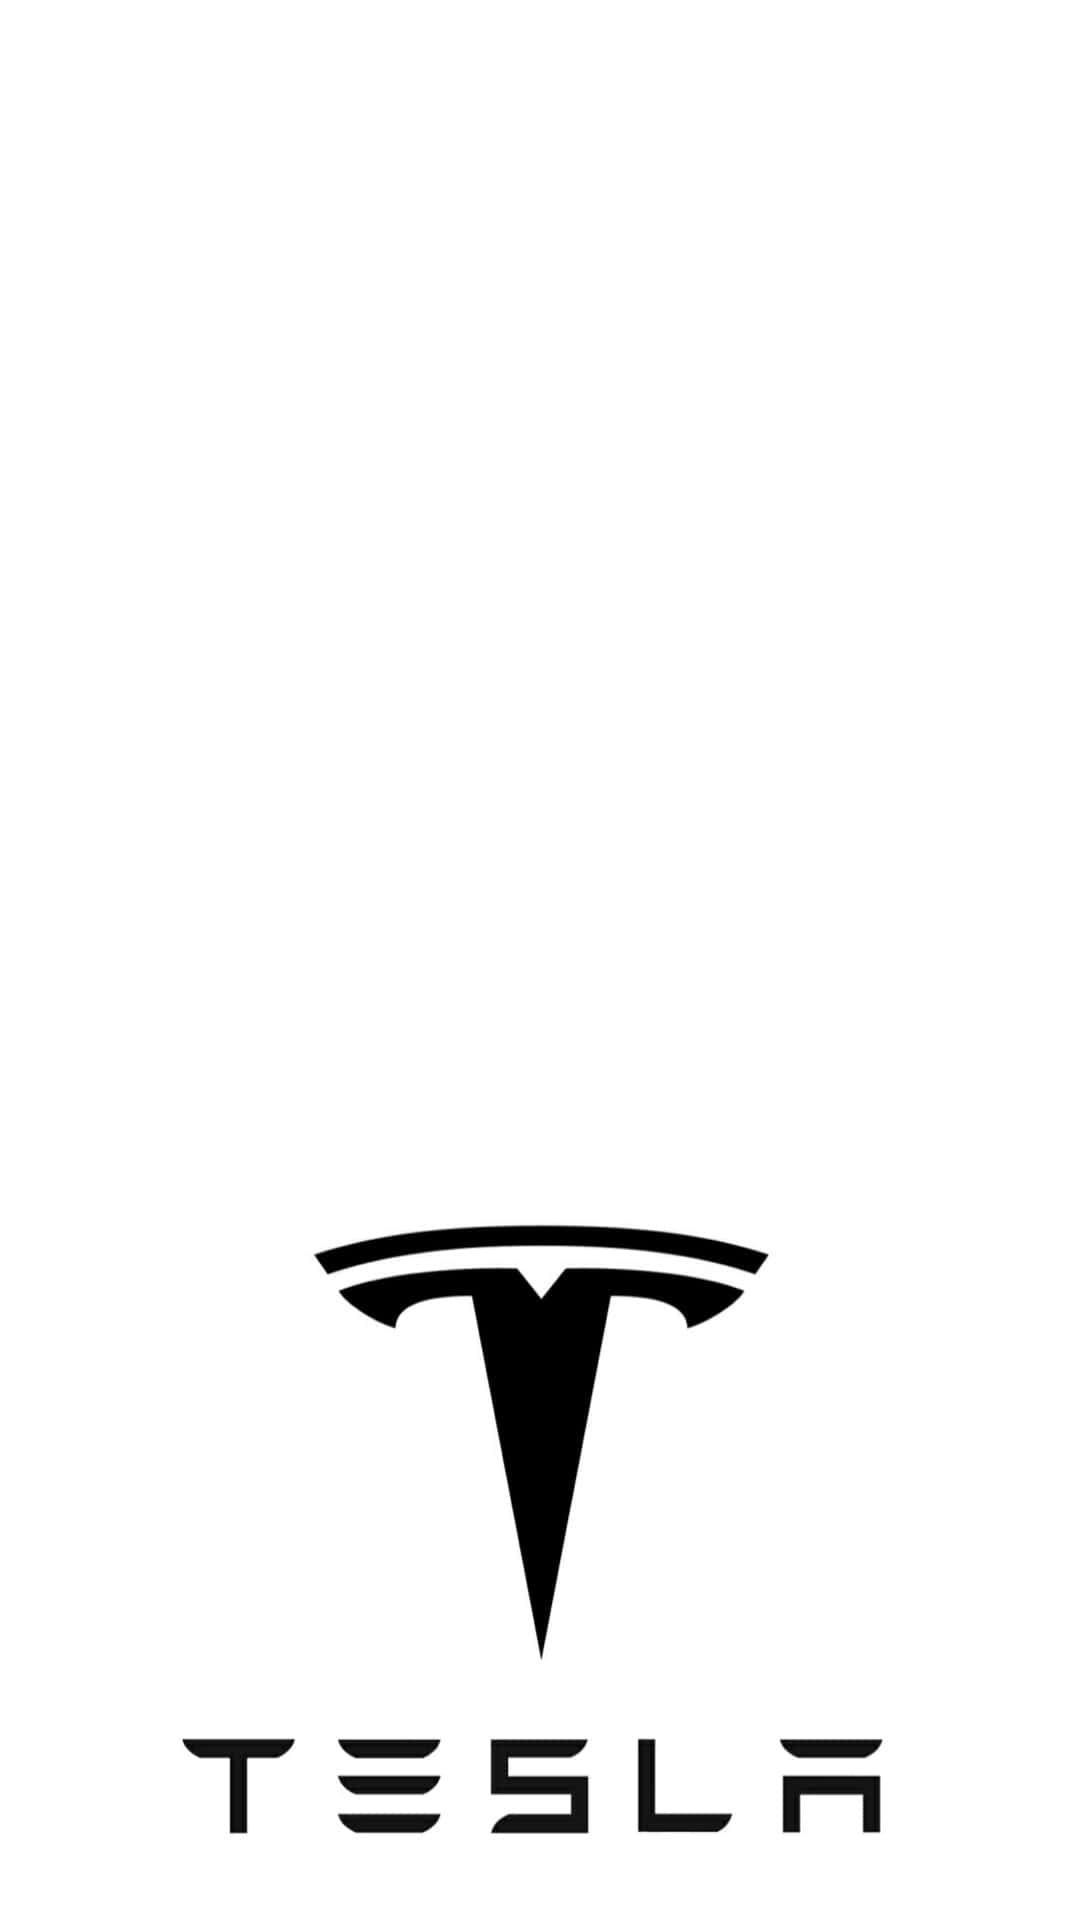 Latest and Greatest with the Tesla Iphone Wallpaper